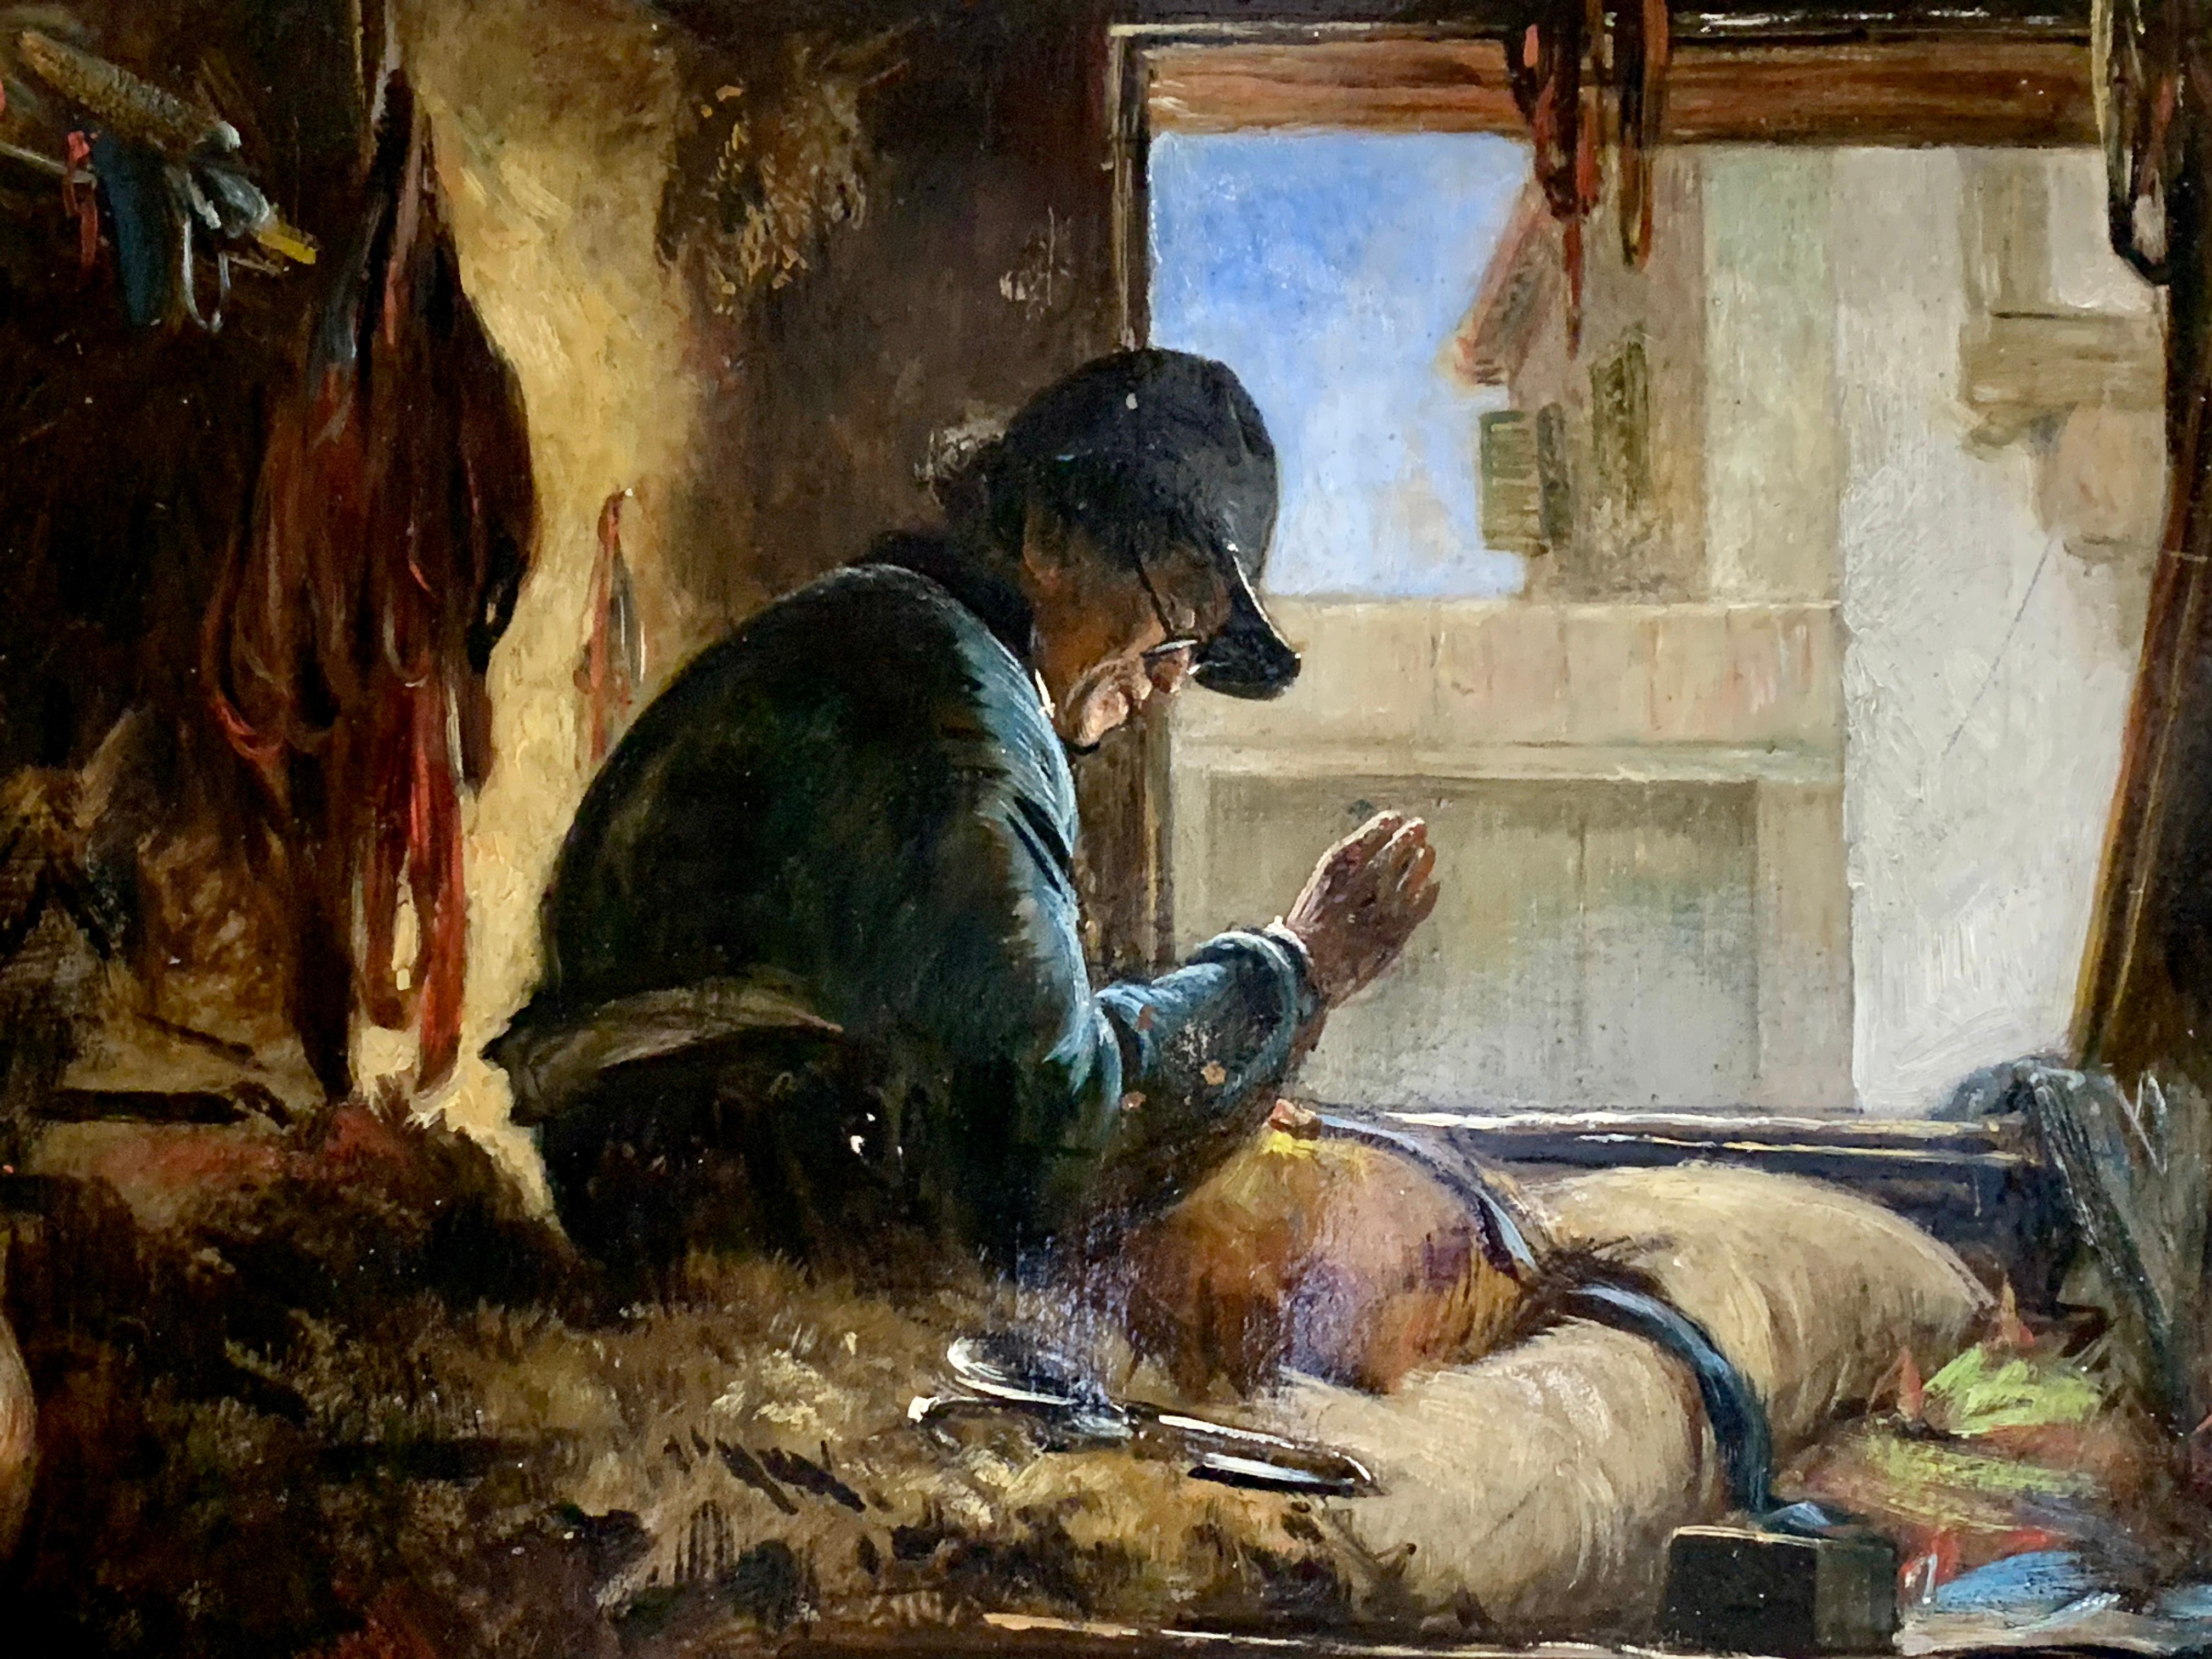 19th century English portrait of a man sowing cloth or leather in his studio - Painting by William James Muller